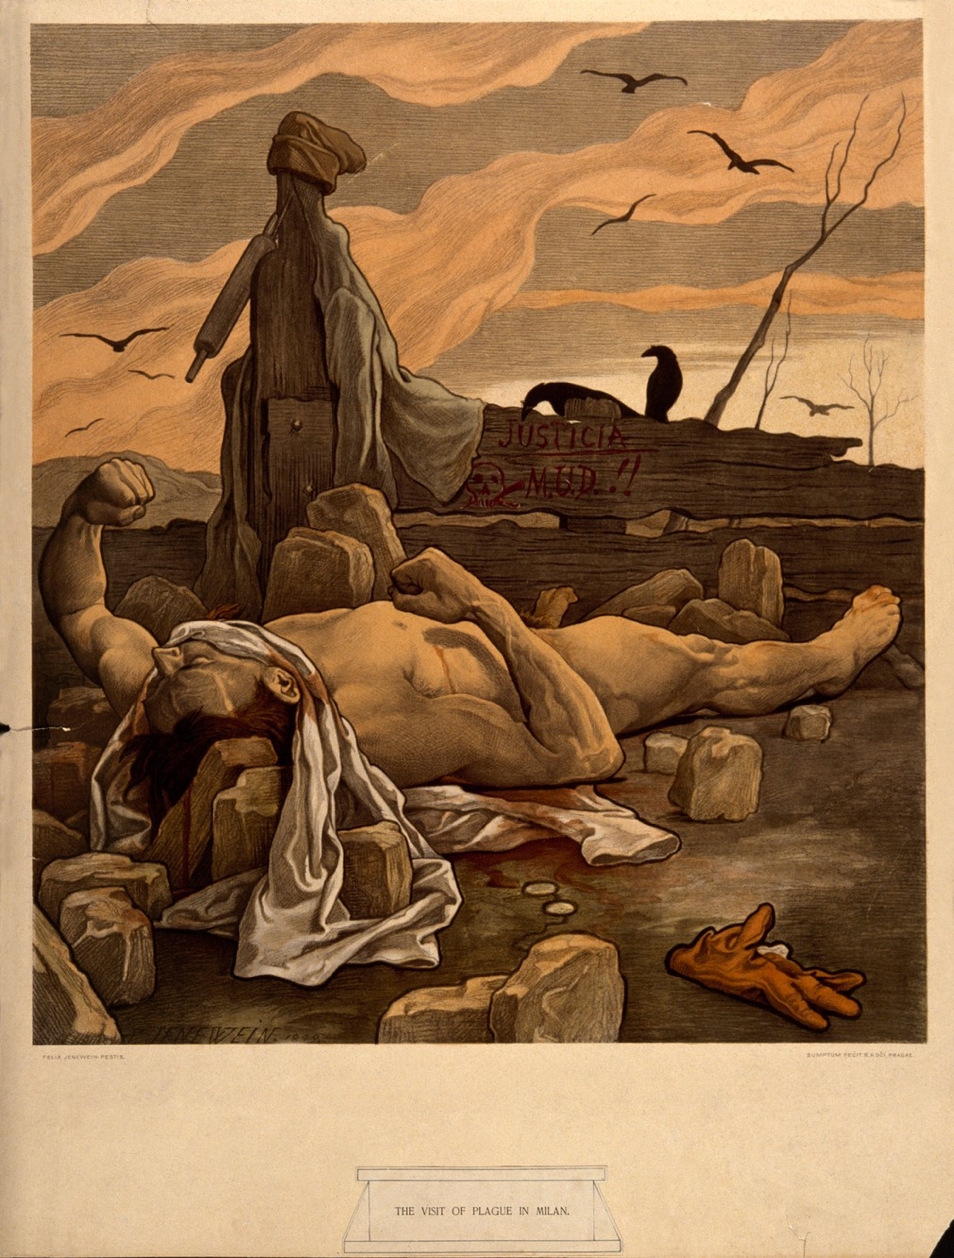 The image shows a man lying dead on some rocks. Crows fly overhead. The man's fists are still clenched and there is blood on the floor beneath him.  He has a white cloth wrapped around his face. 